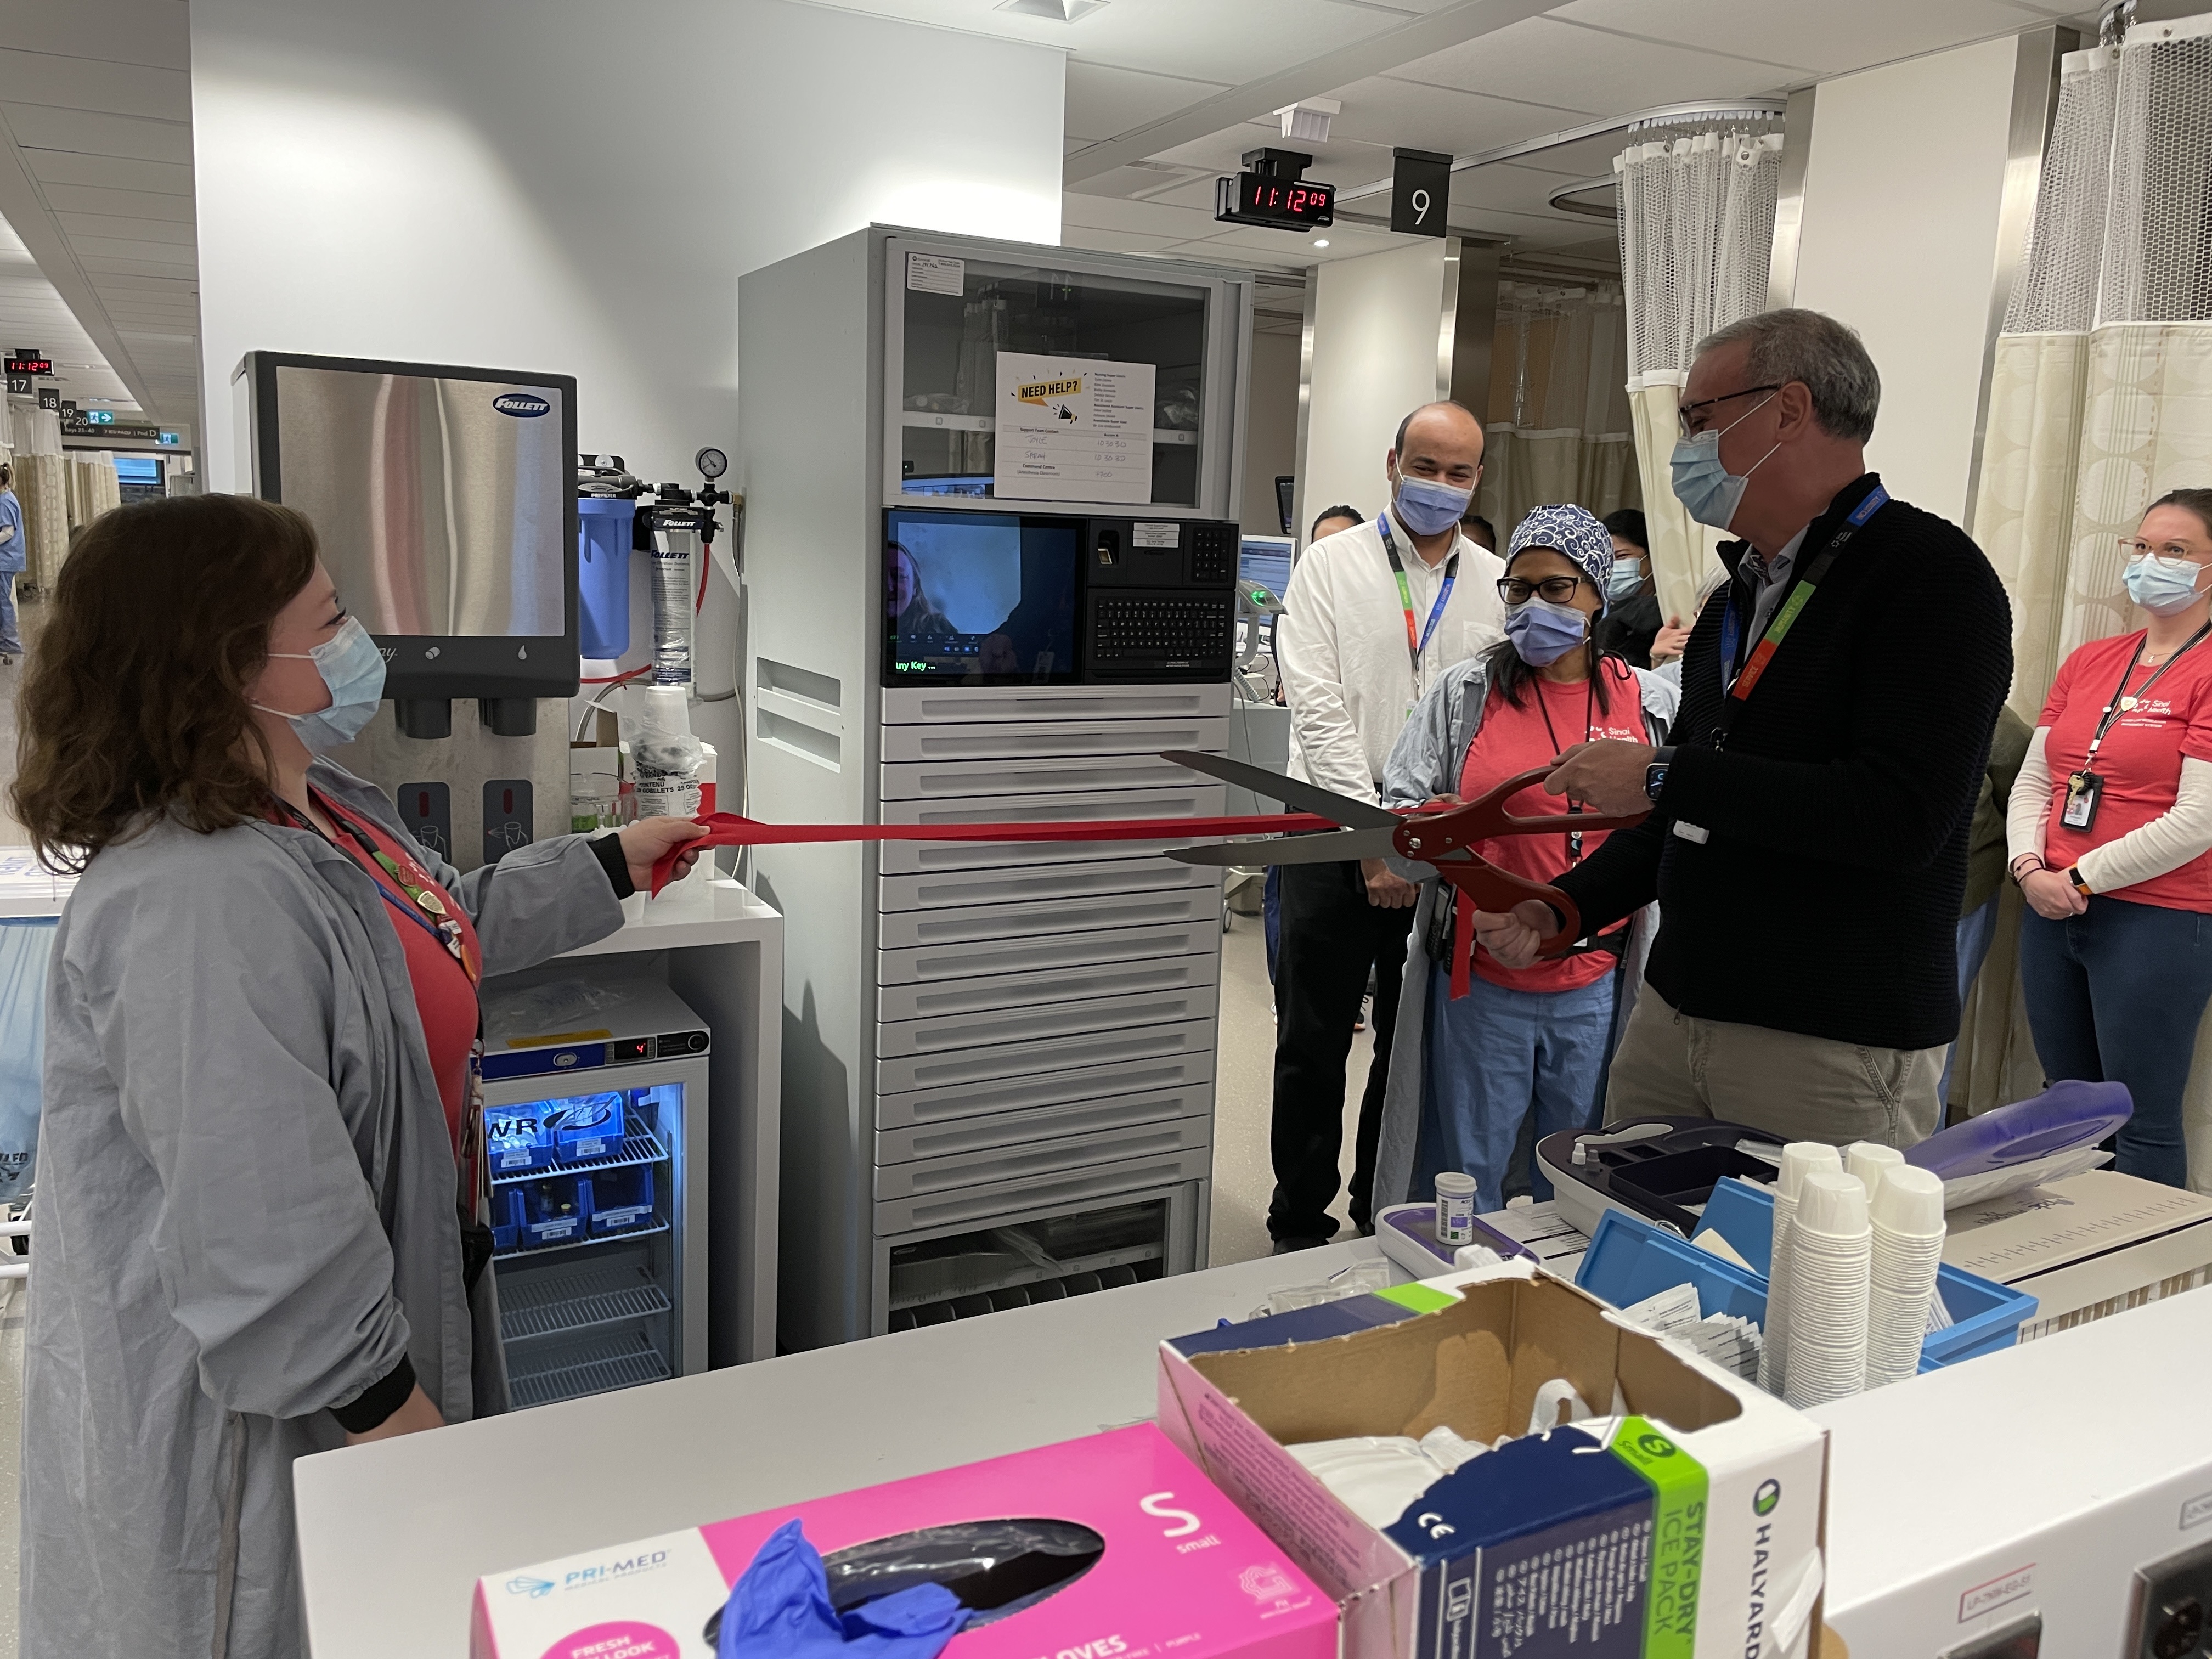 Dr. Gary Newton, president and CEO holds a large pair of scissors poised to cut through a red ribbon held in front of an automated medication dispensing machine. The machine is a cabinet with drawers and is similar in size to a refrigerator . Two women are standing on either side of the machine holding up each end of the ribbon. Other employees look on in the background